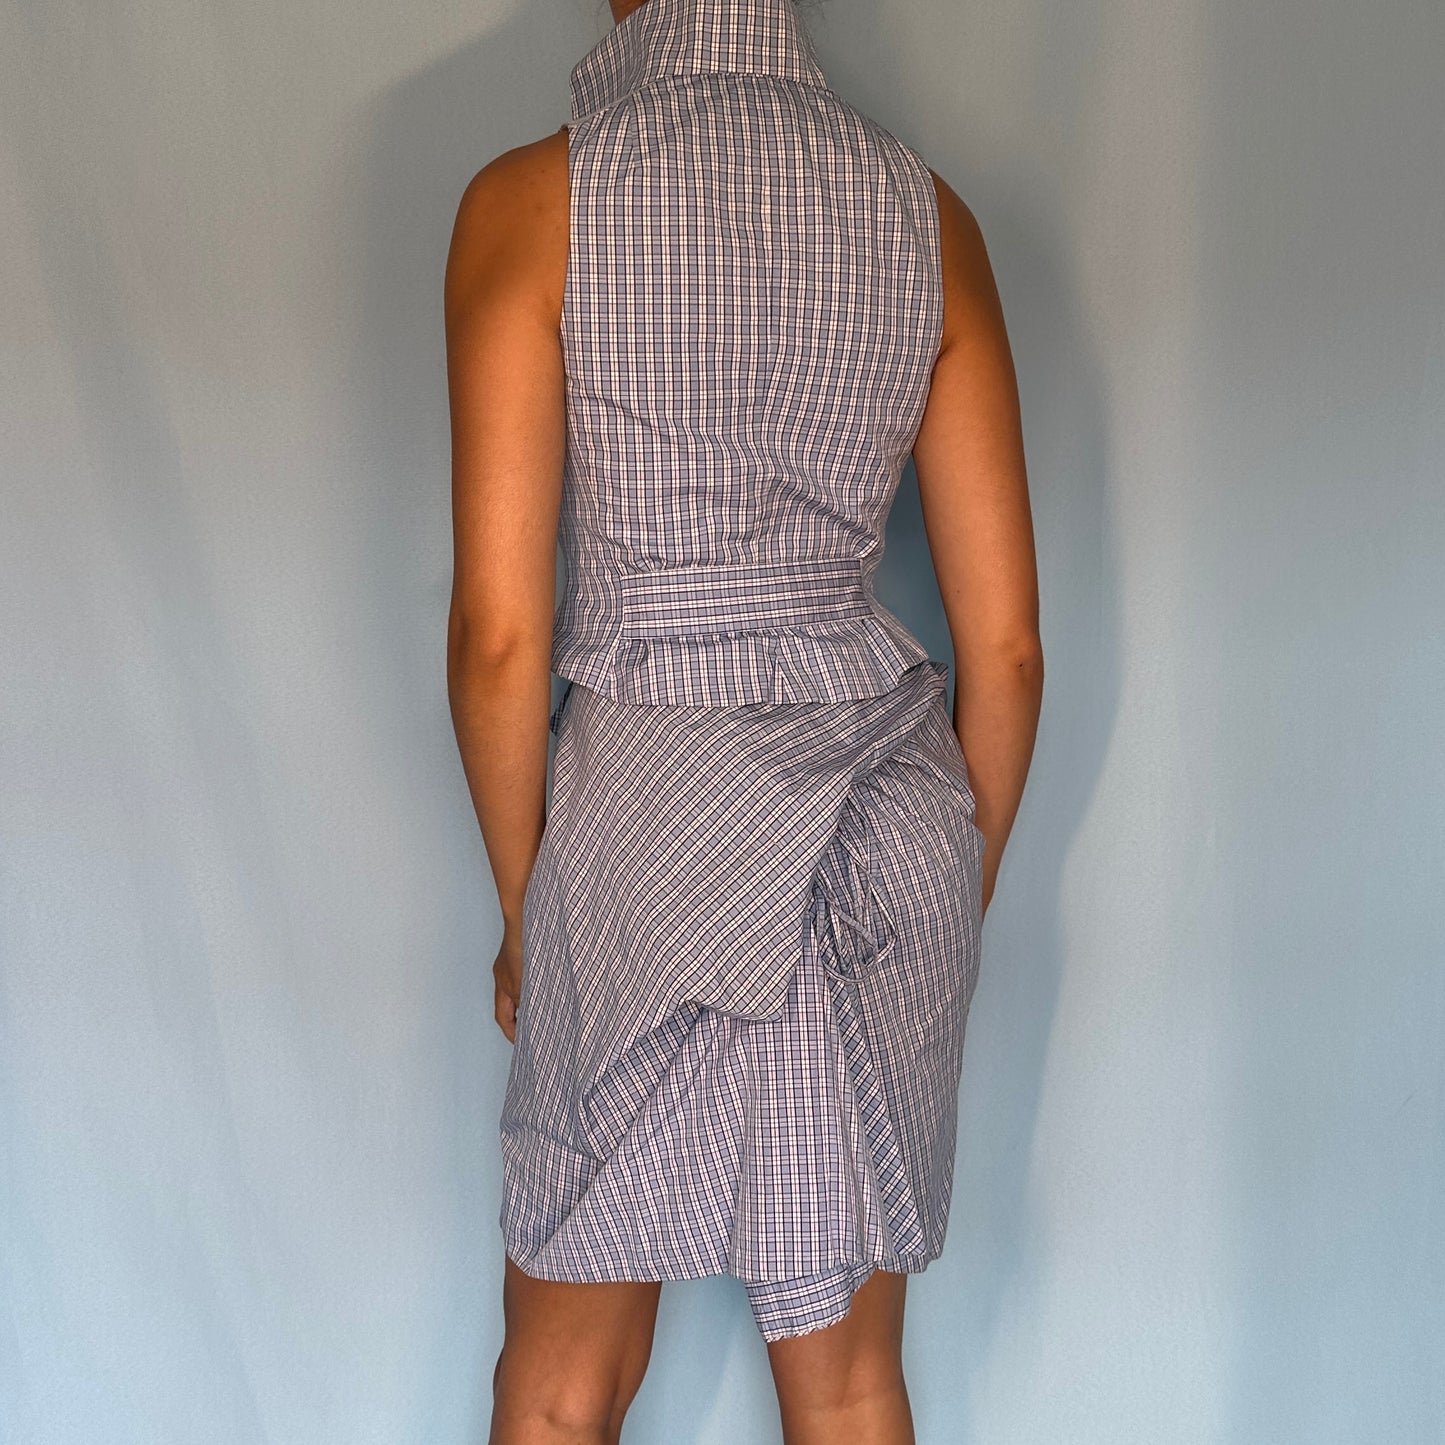 Vivienne Westwood Spring 1994 “Cafe Society” Checked Bustle Skirt & Waistcoat Set